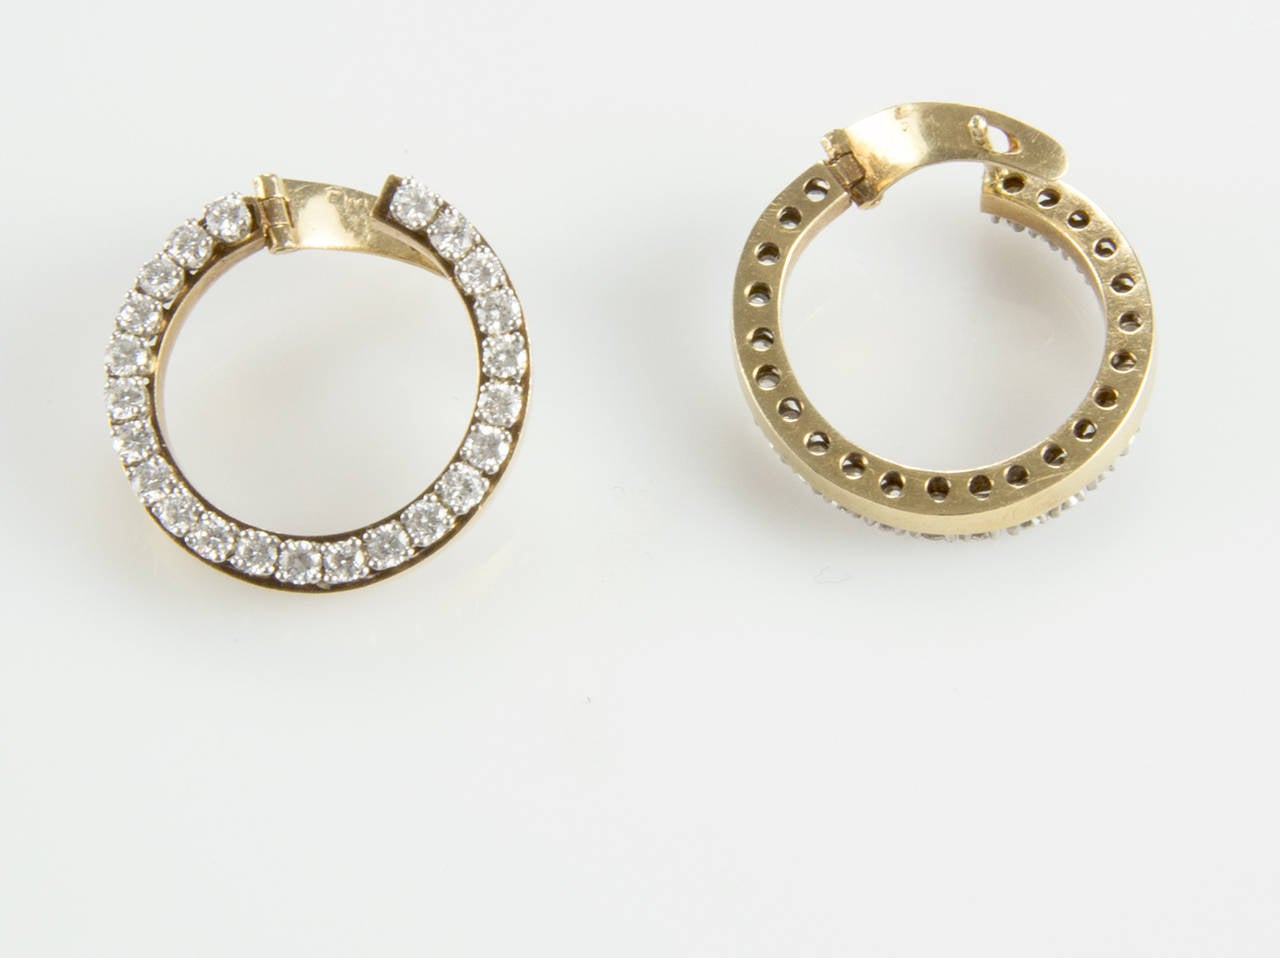 Chic and sparkling, these diamond earrings feature round diamonds set in an open circle design of 14k yellow gold; approx. 1.38 total carat weight; G/H color. An elegant accent to any ensemble!